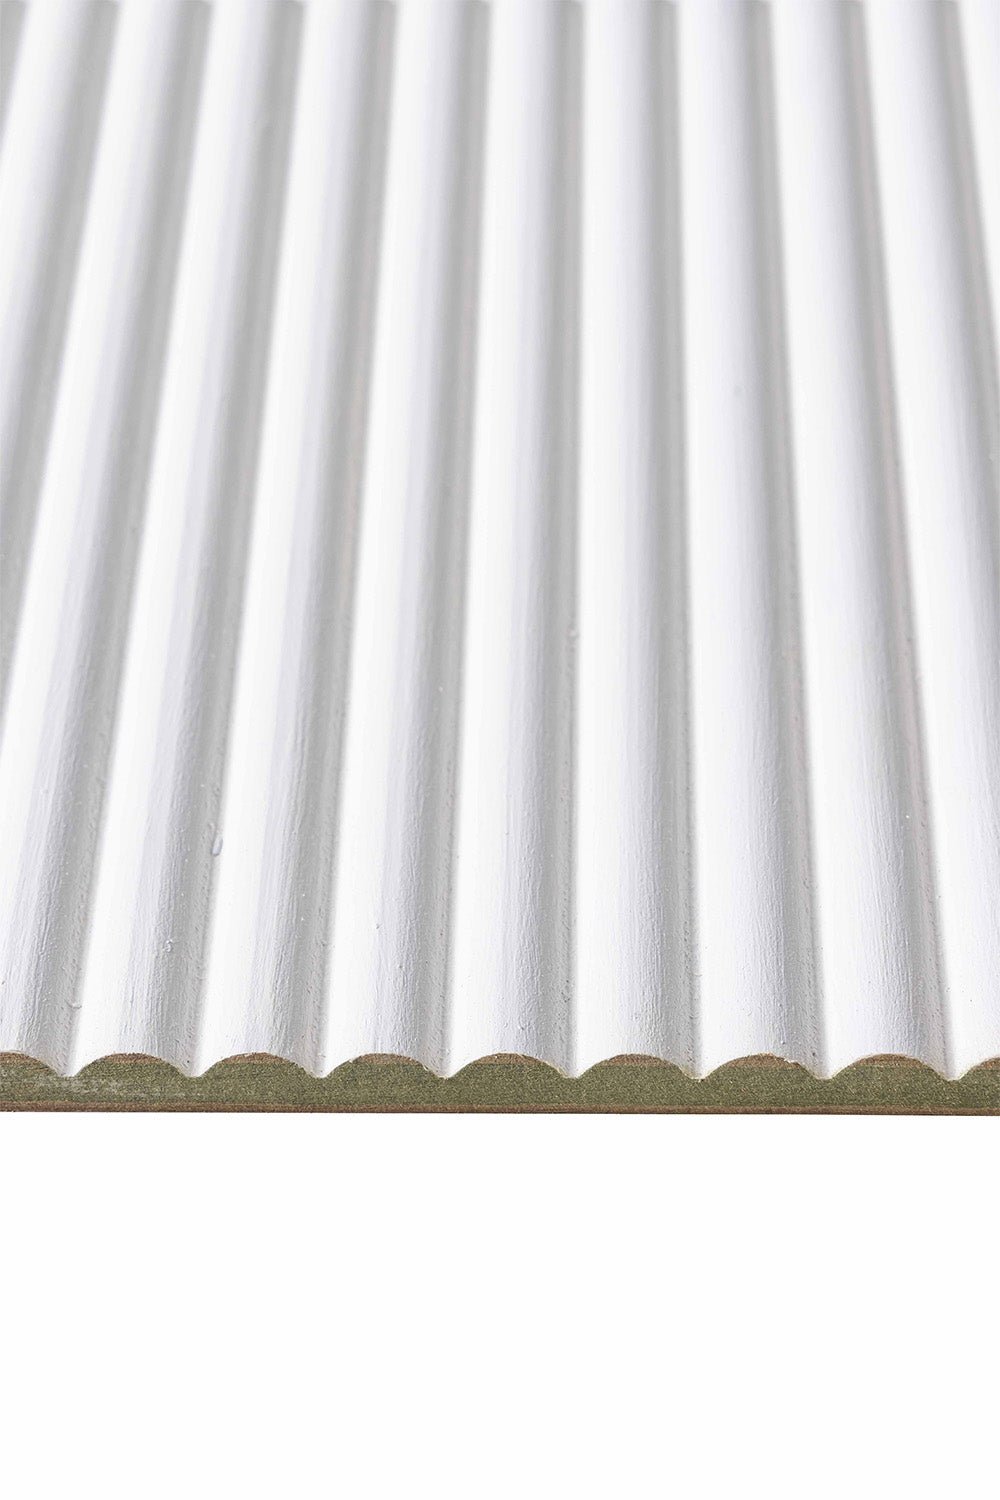 close up image of a primed reeded sample

